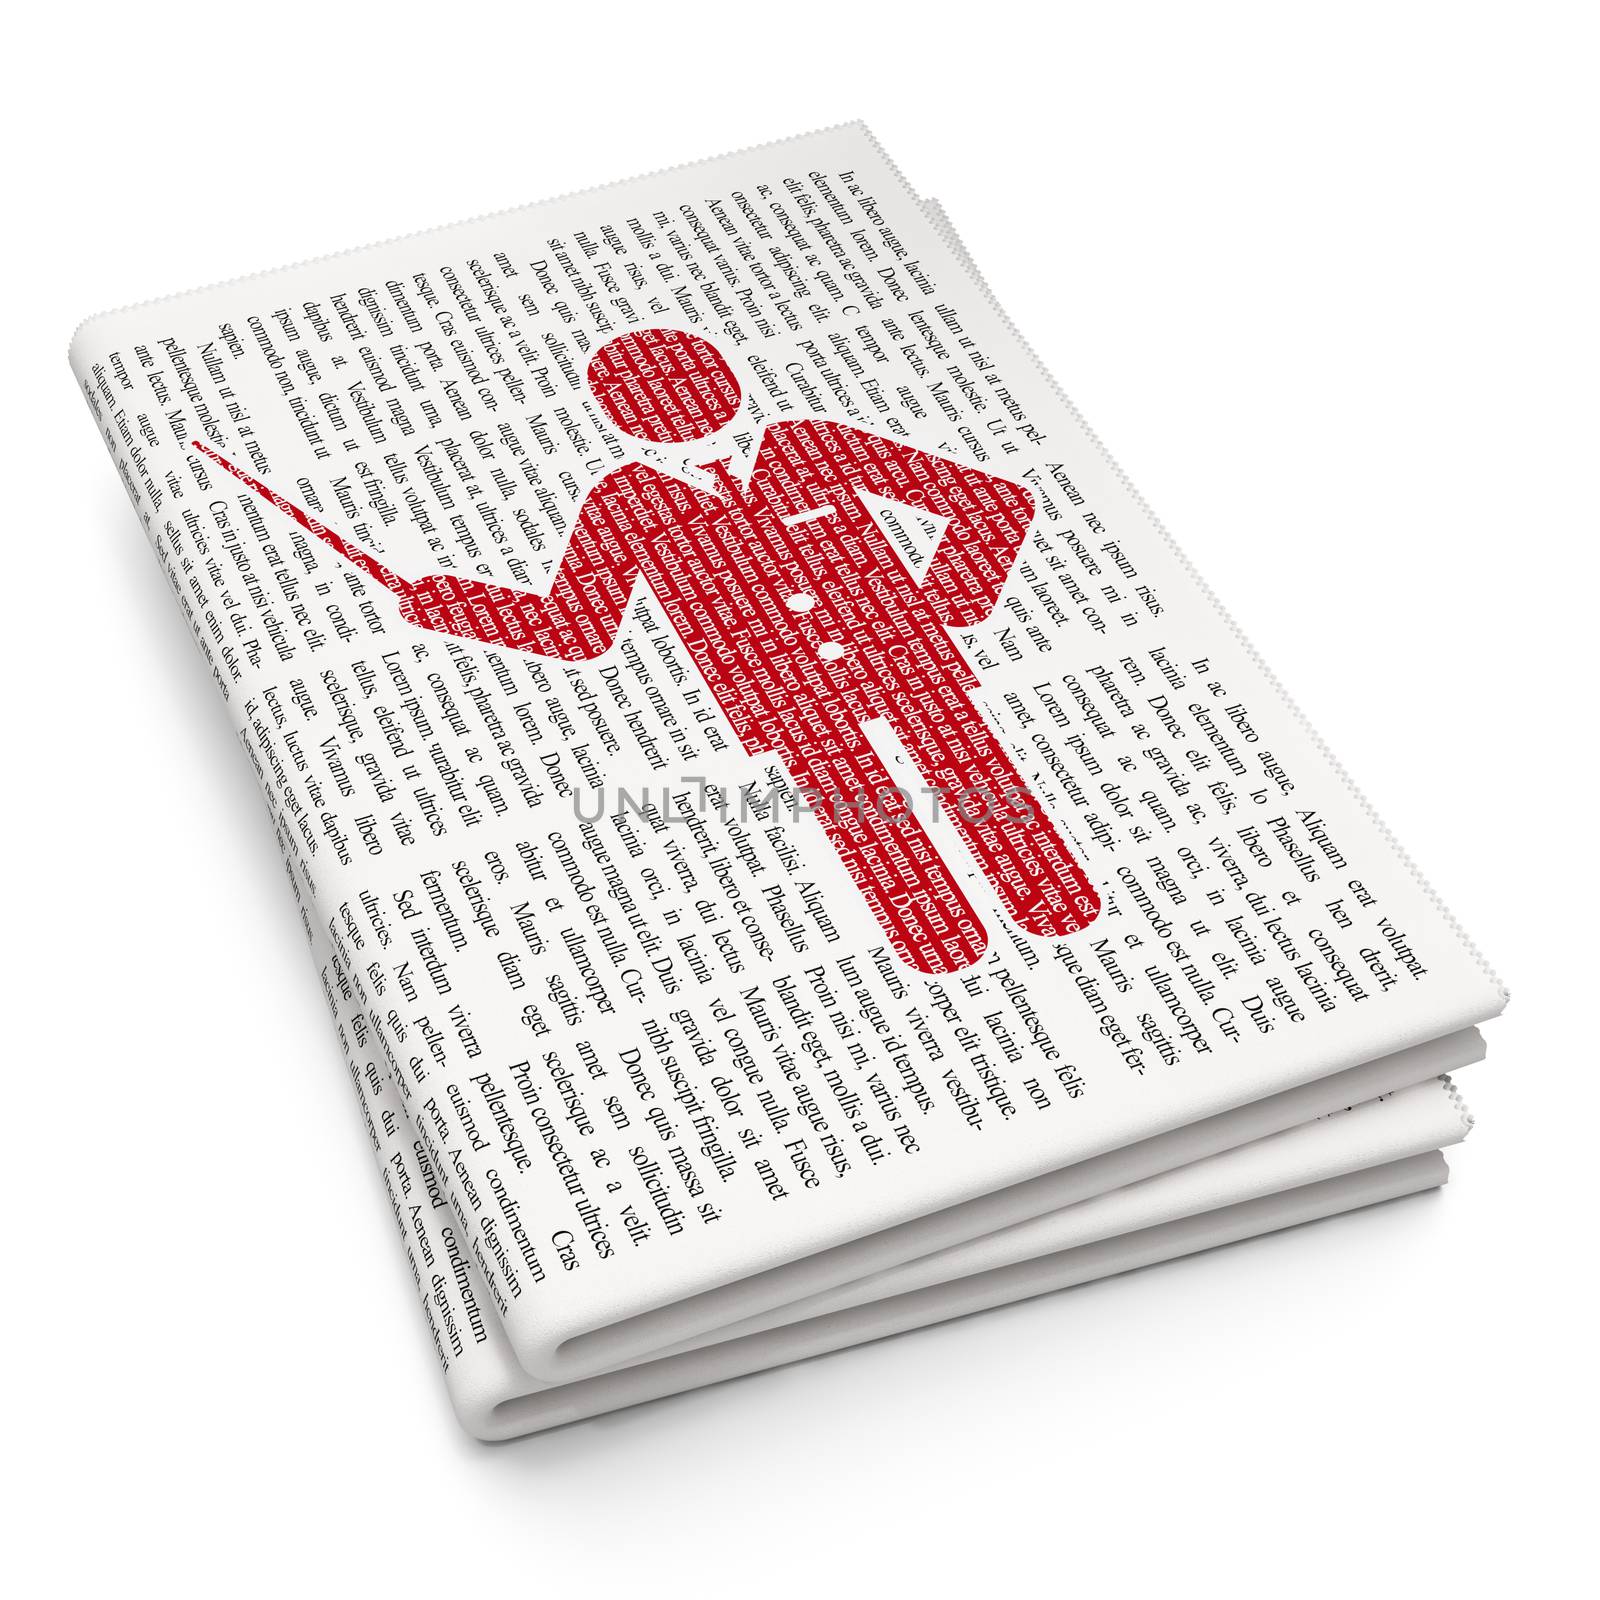 Studying concept: Pixelated red Teacher icon on Newspaper background, 3D rendering